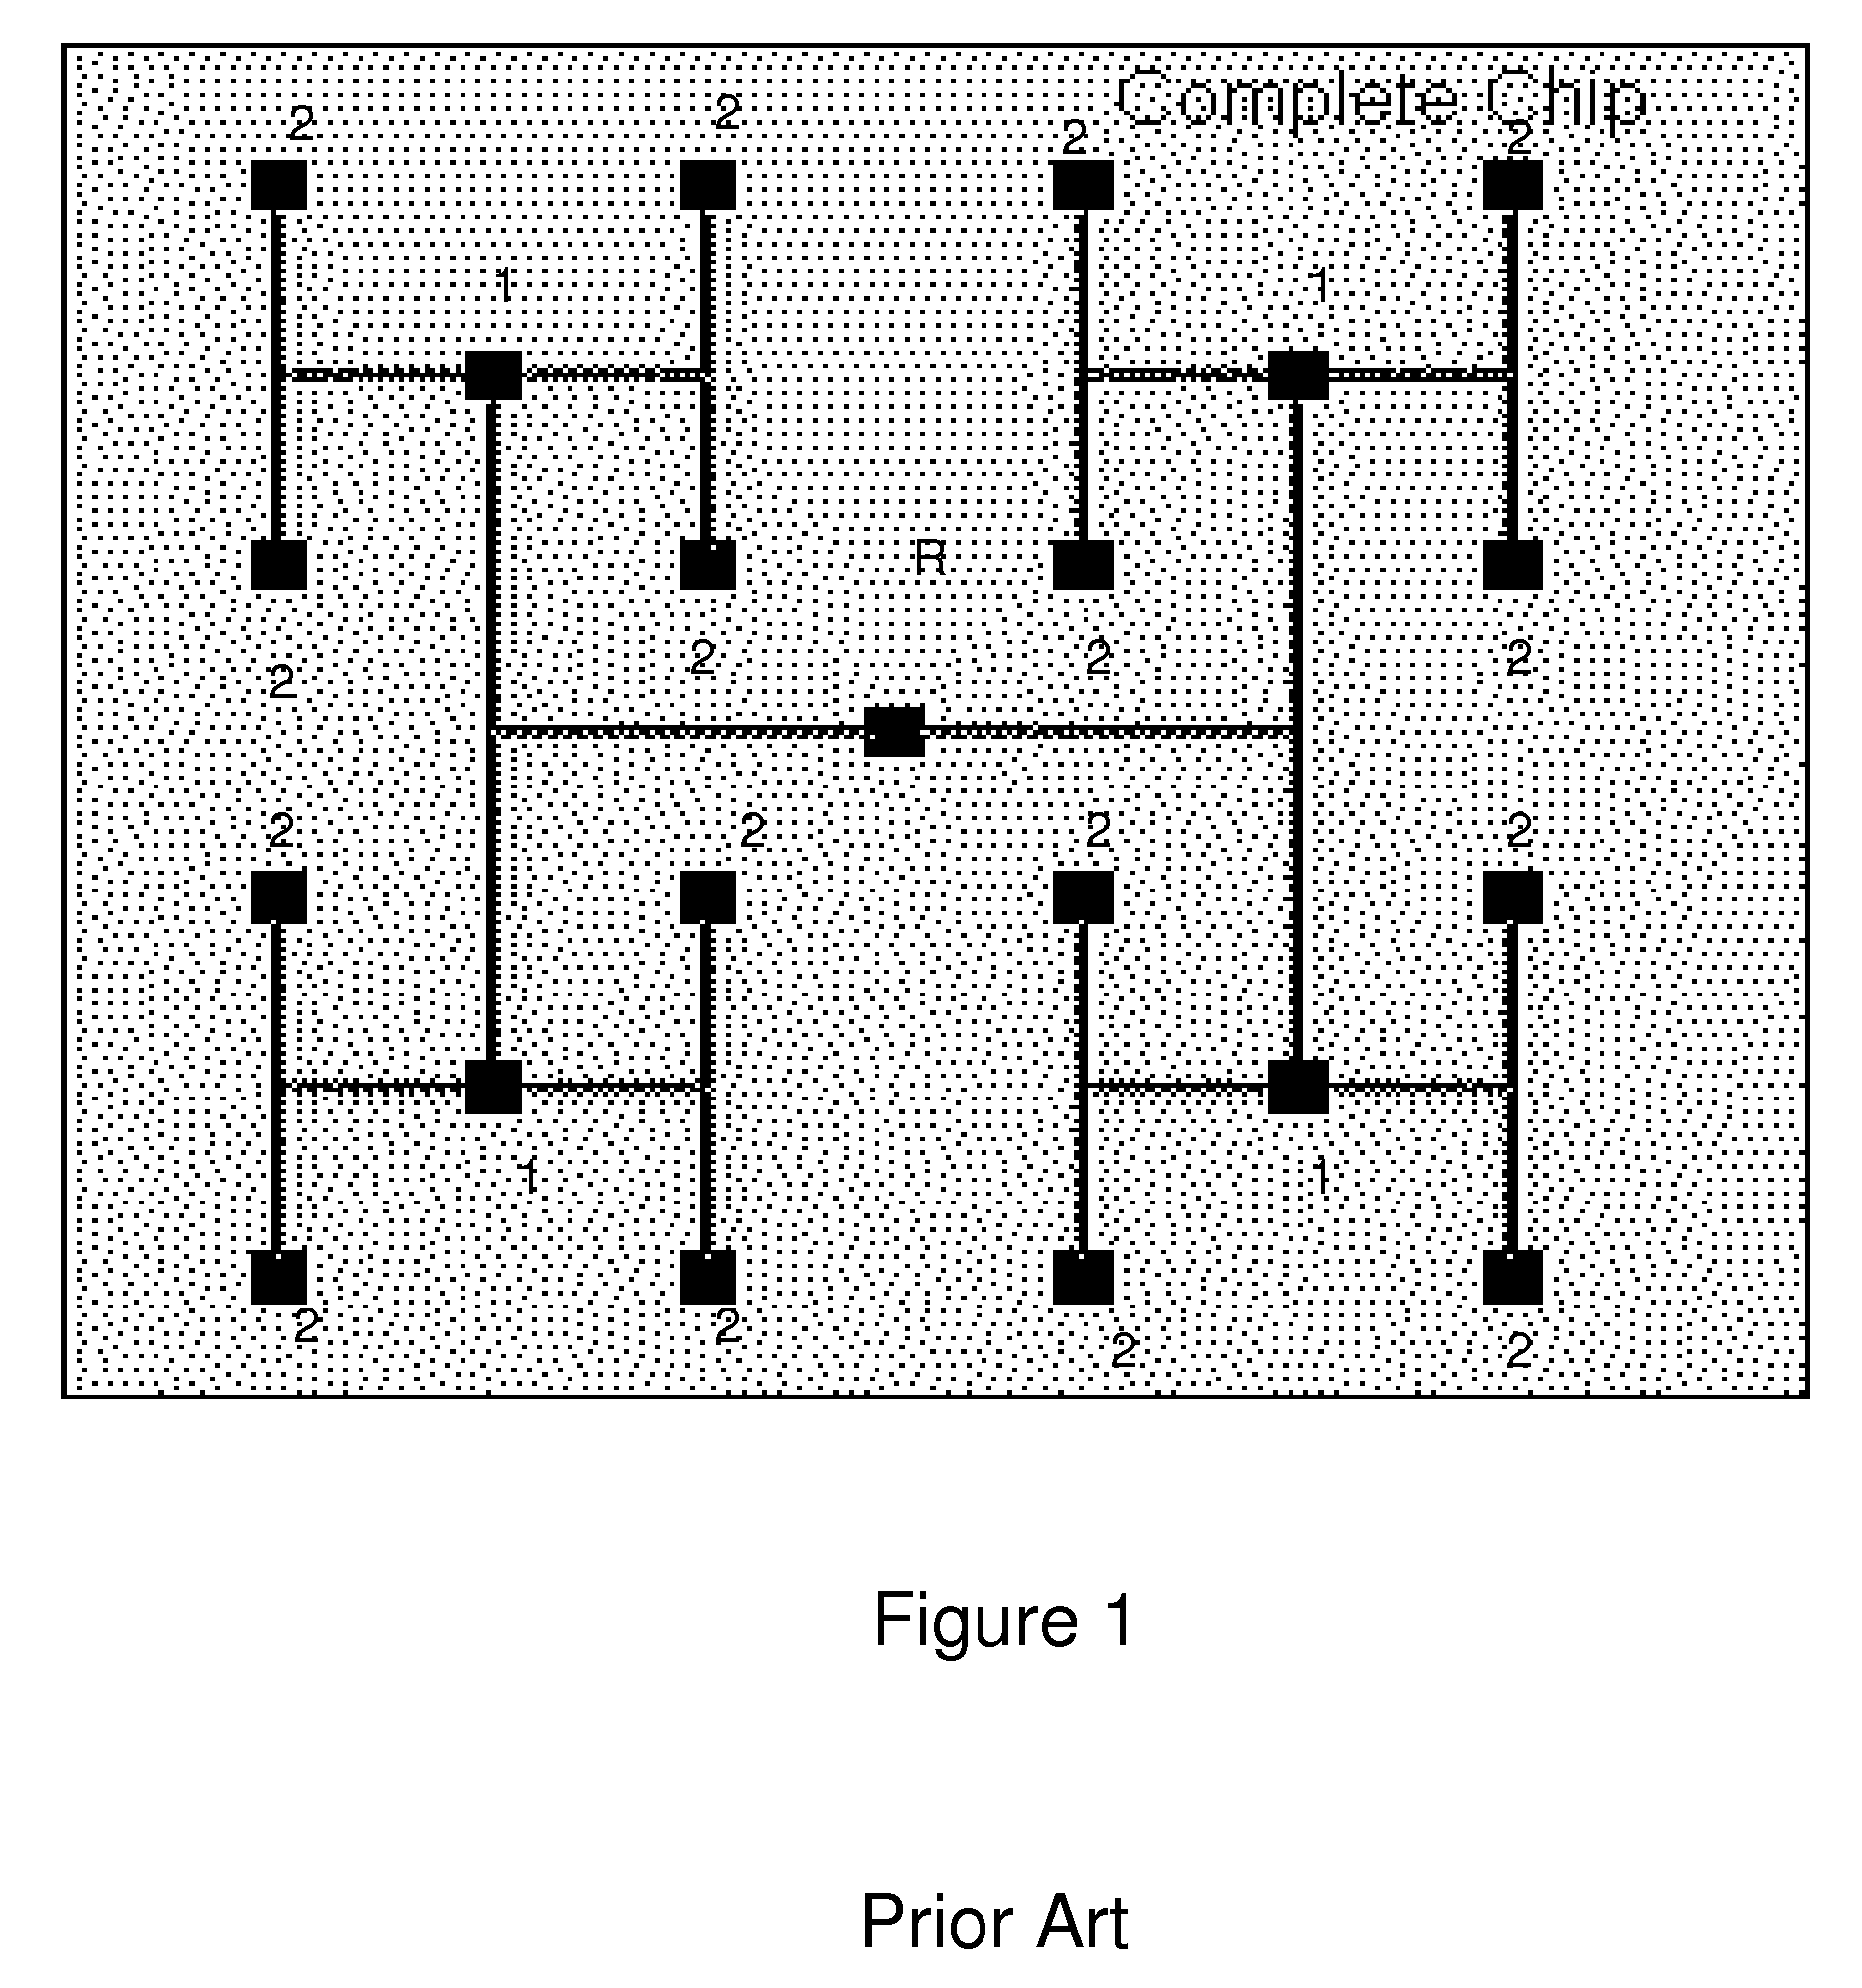 Method of Generating Wiring Routes with Matching Delay in the Presence of Process Variation